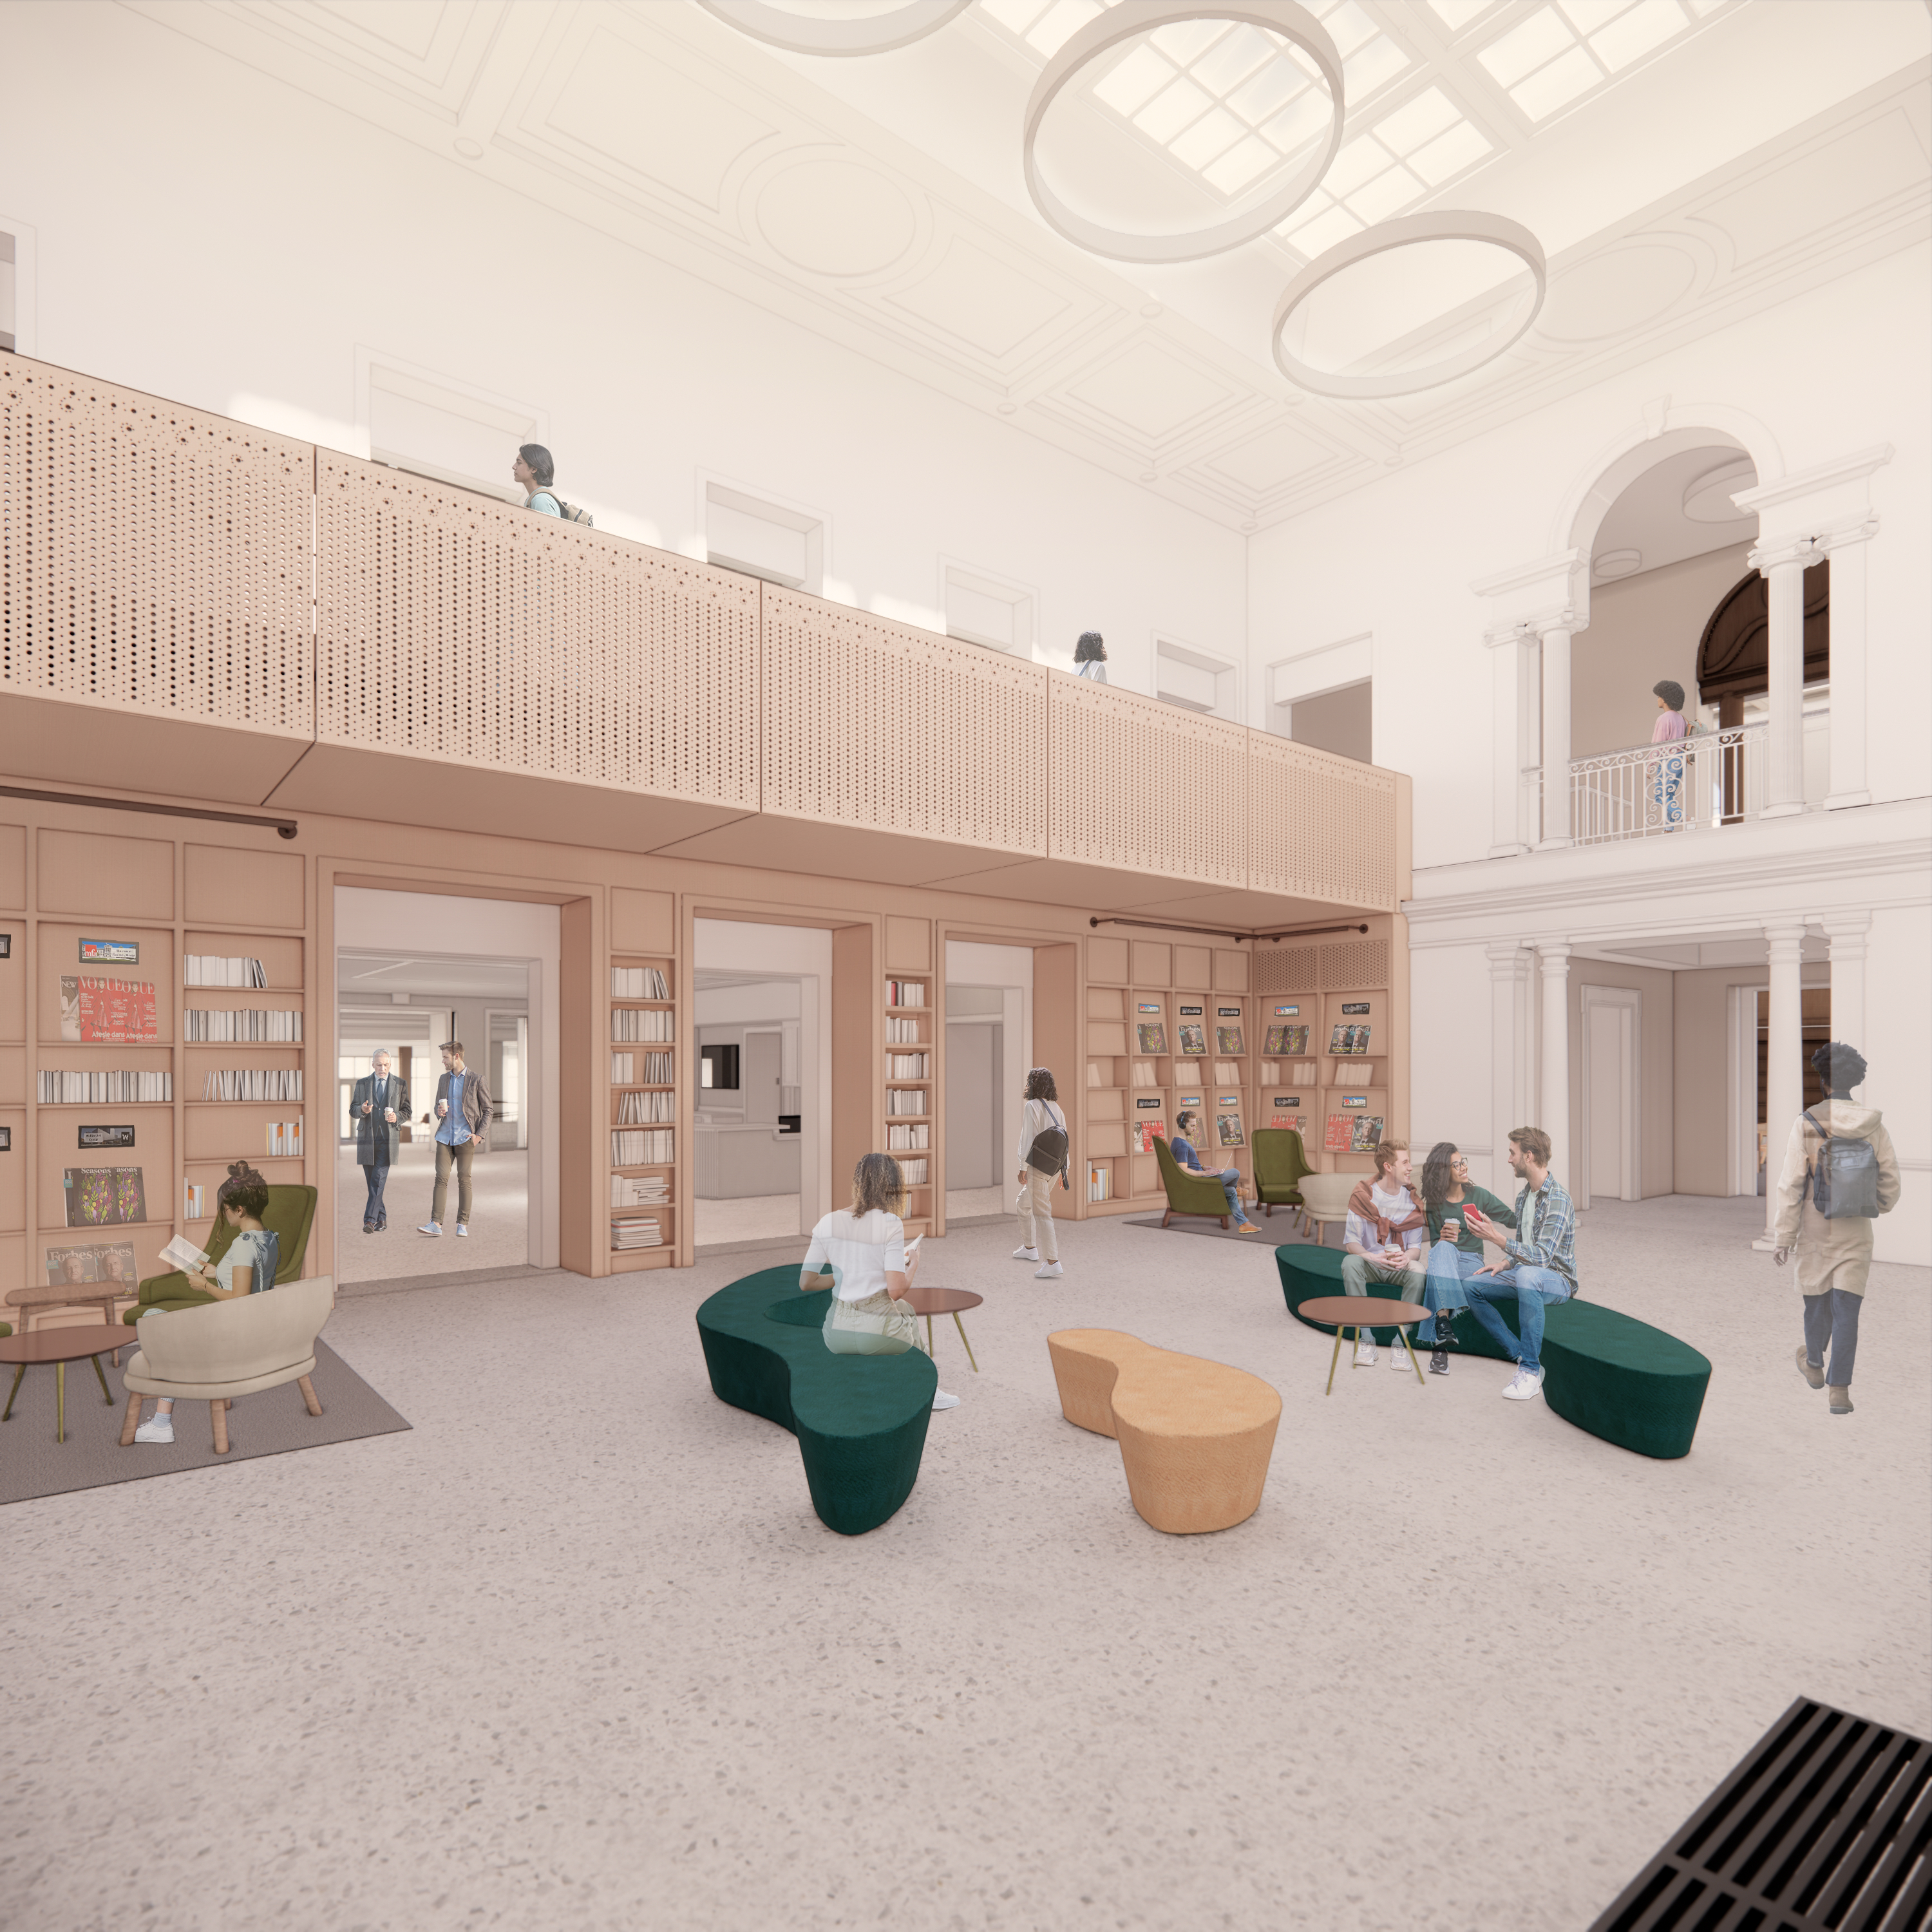 Rendering of renovated library space, showing atrium and user seating area.